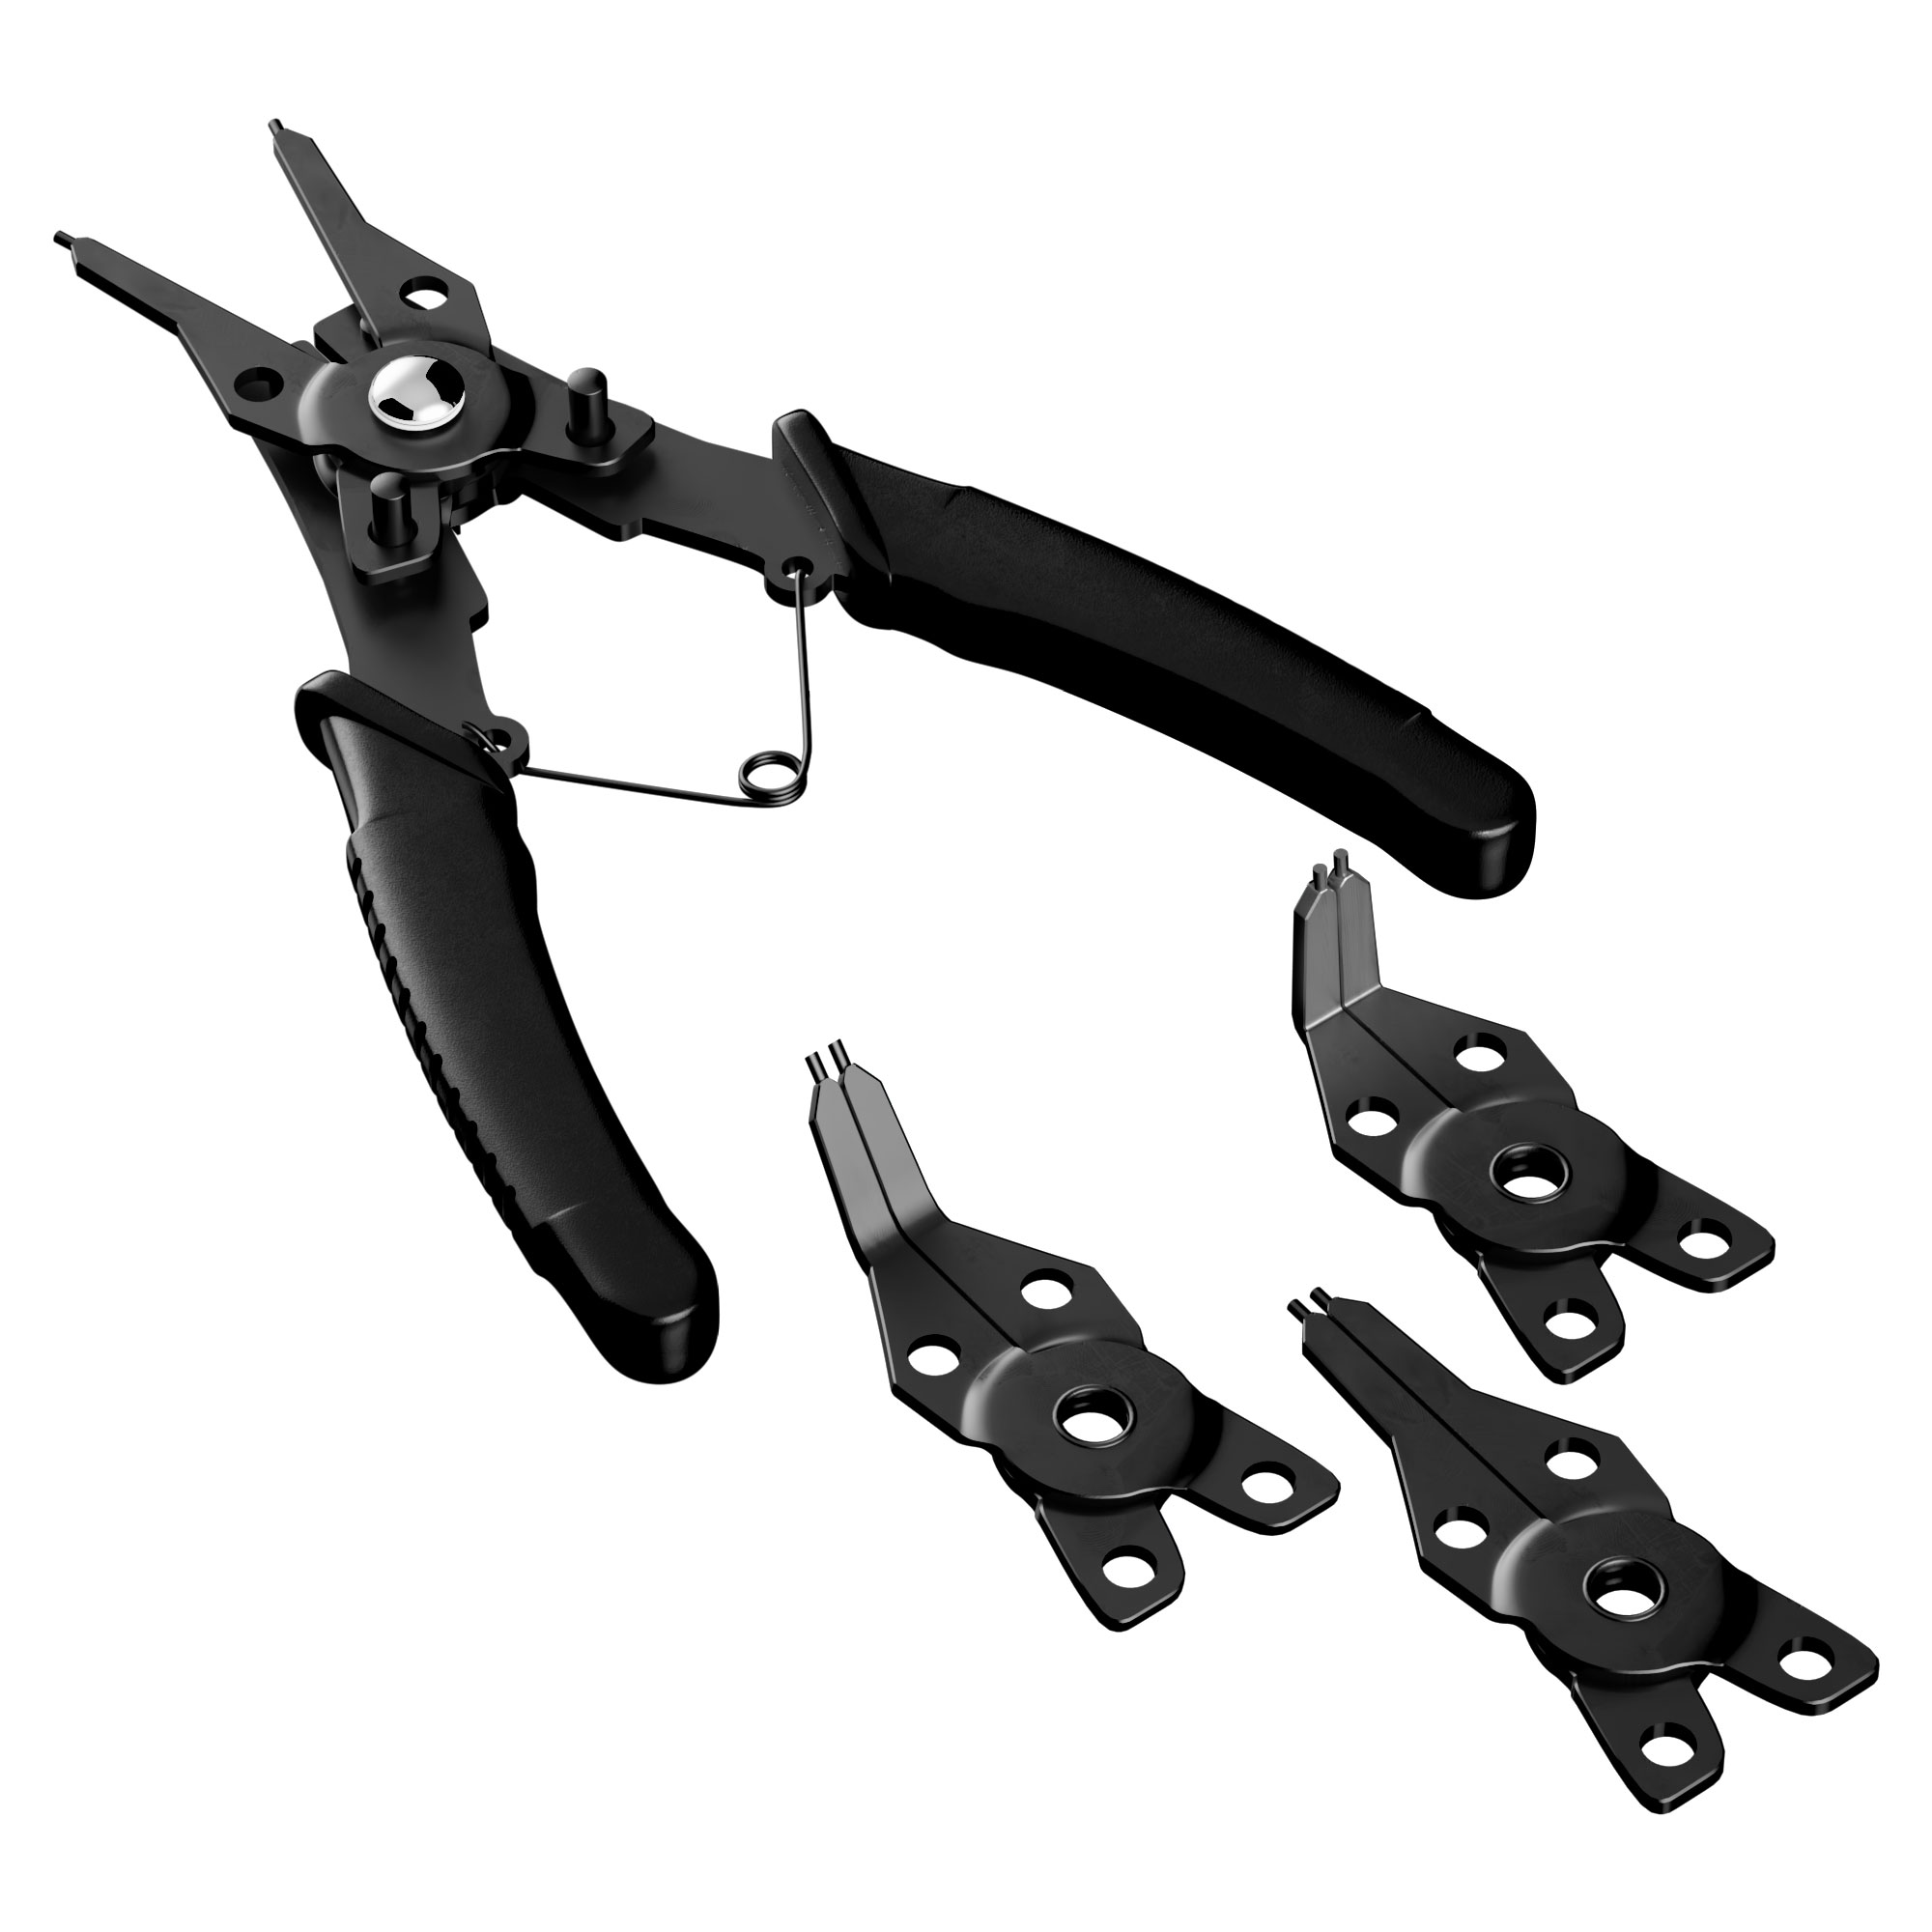 4205-0001-0001 Snap Ring Pliers shown with included interchangeable heads.